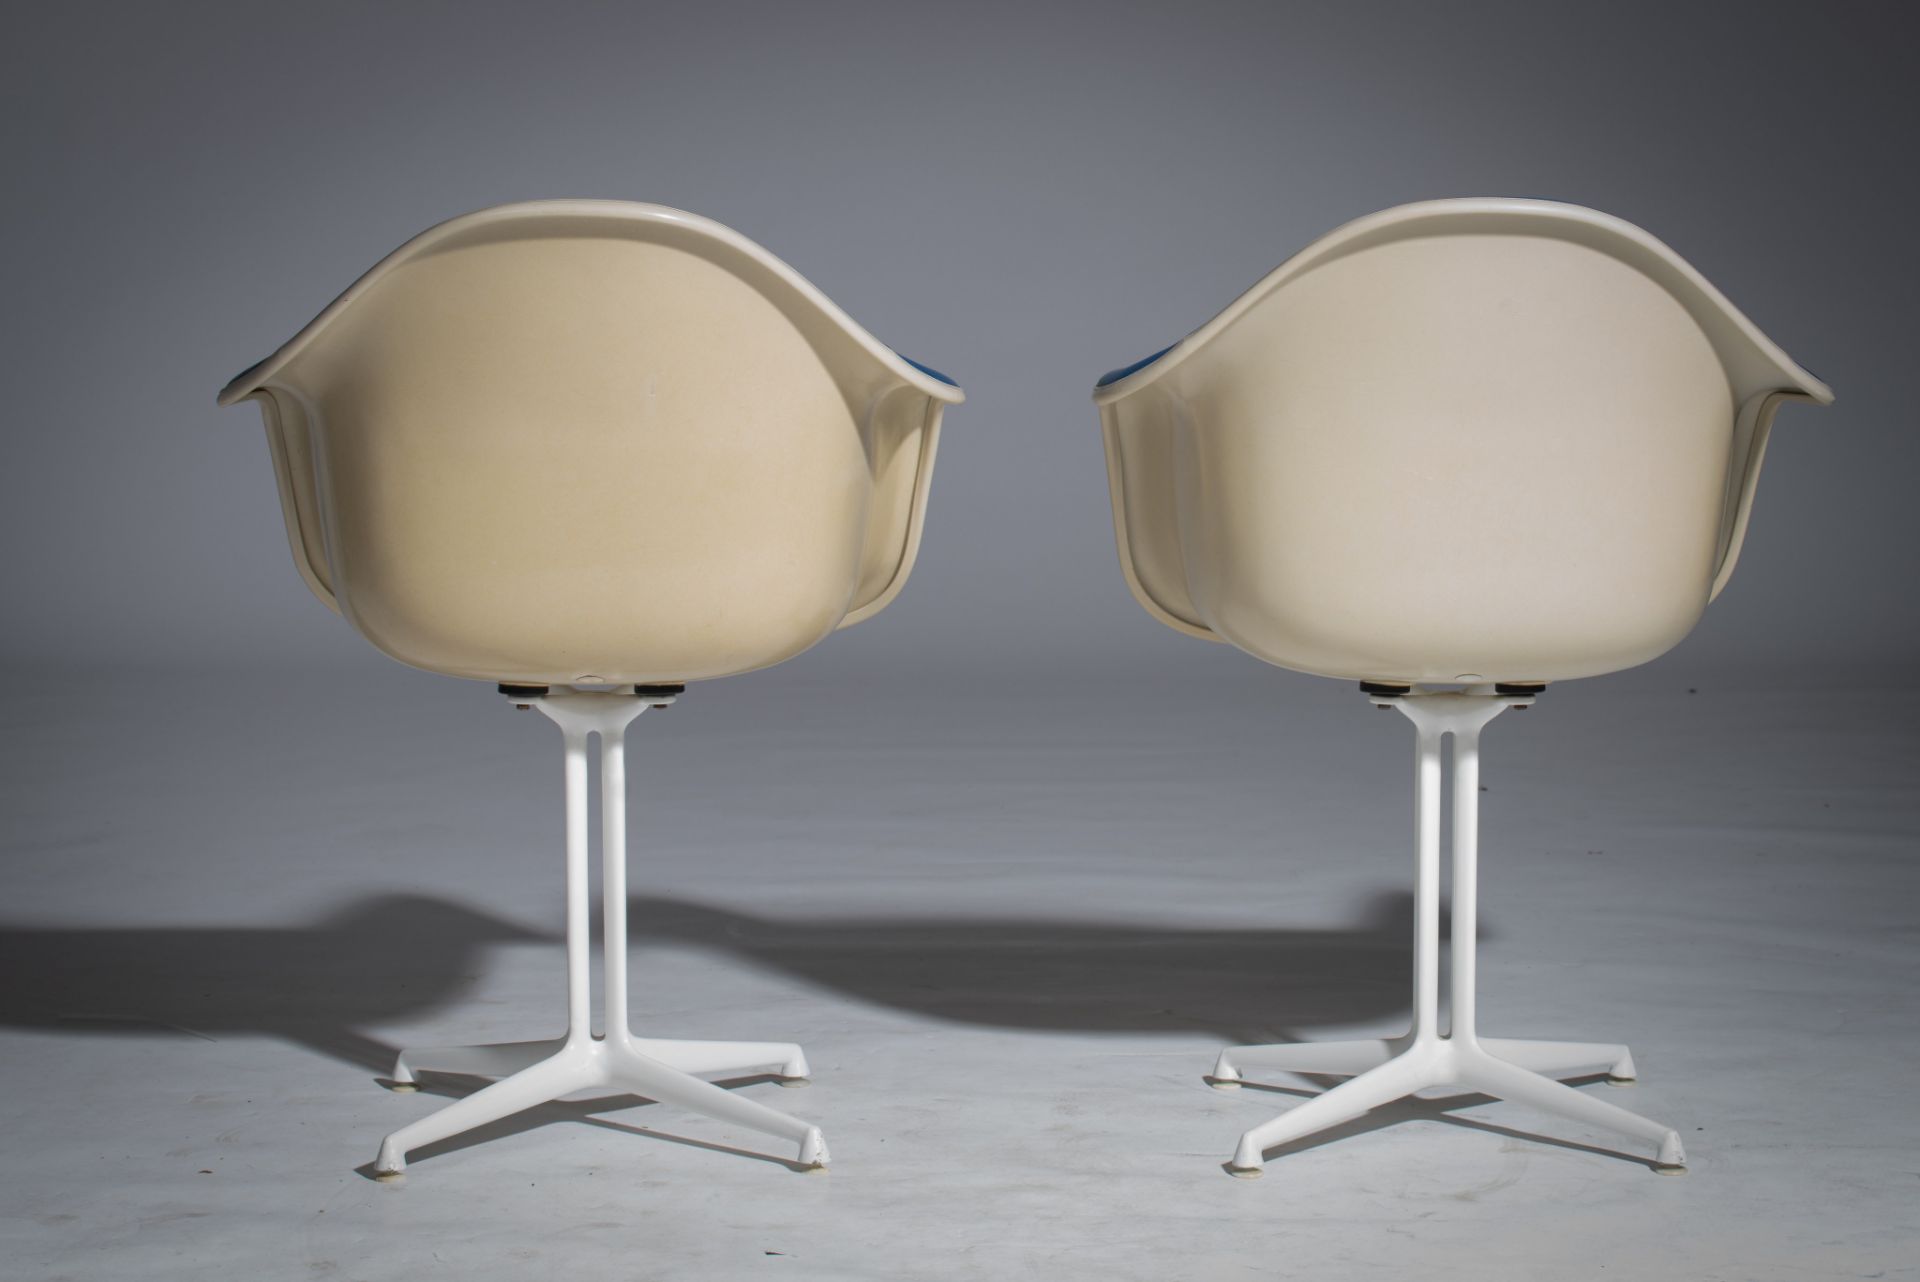 A fine set of six dining chairs by Charles and Ray Eames for Herman Miller, USA, 1960s, H 83 - 85 - - Image 10 of 16